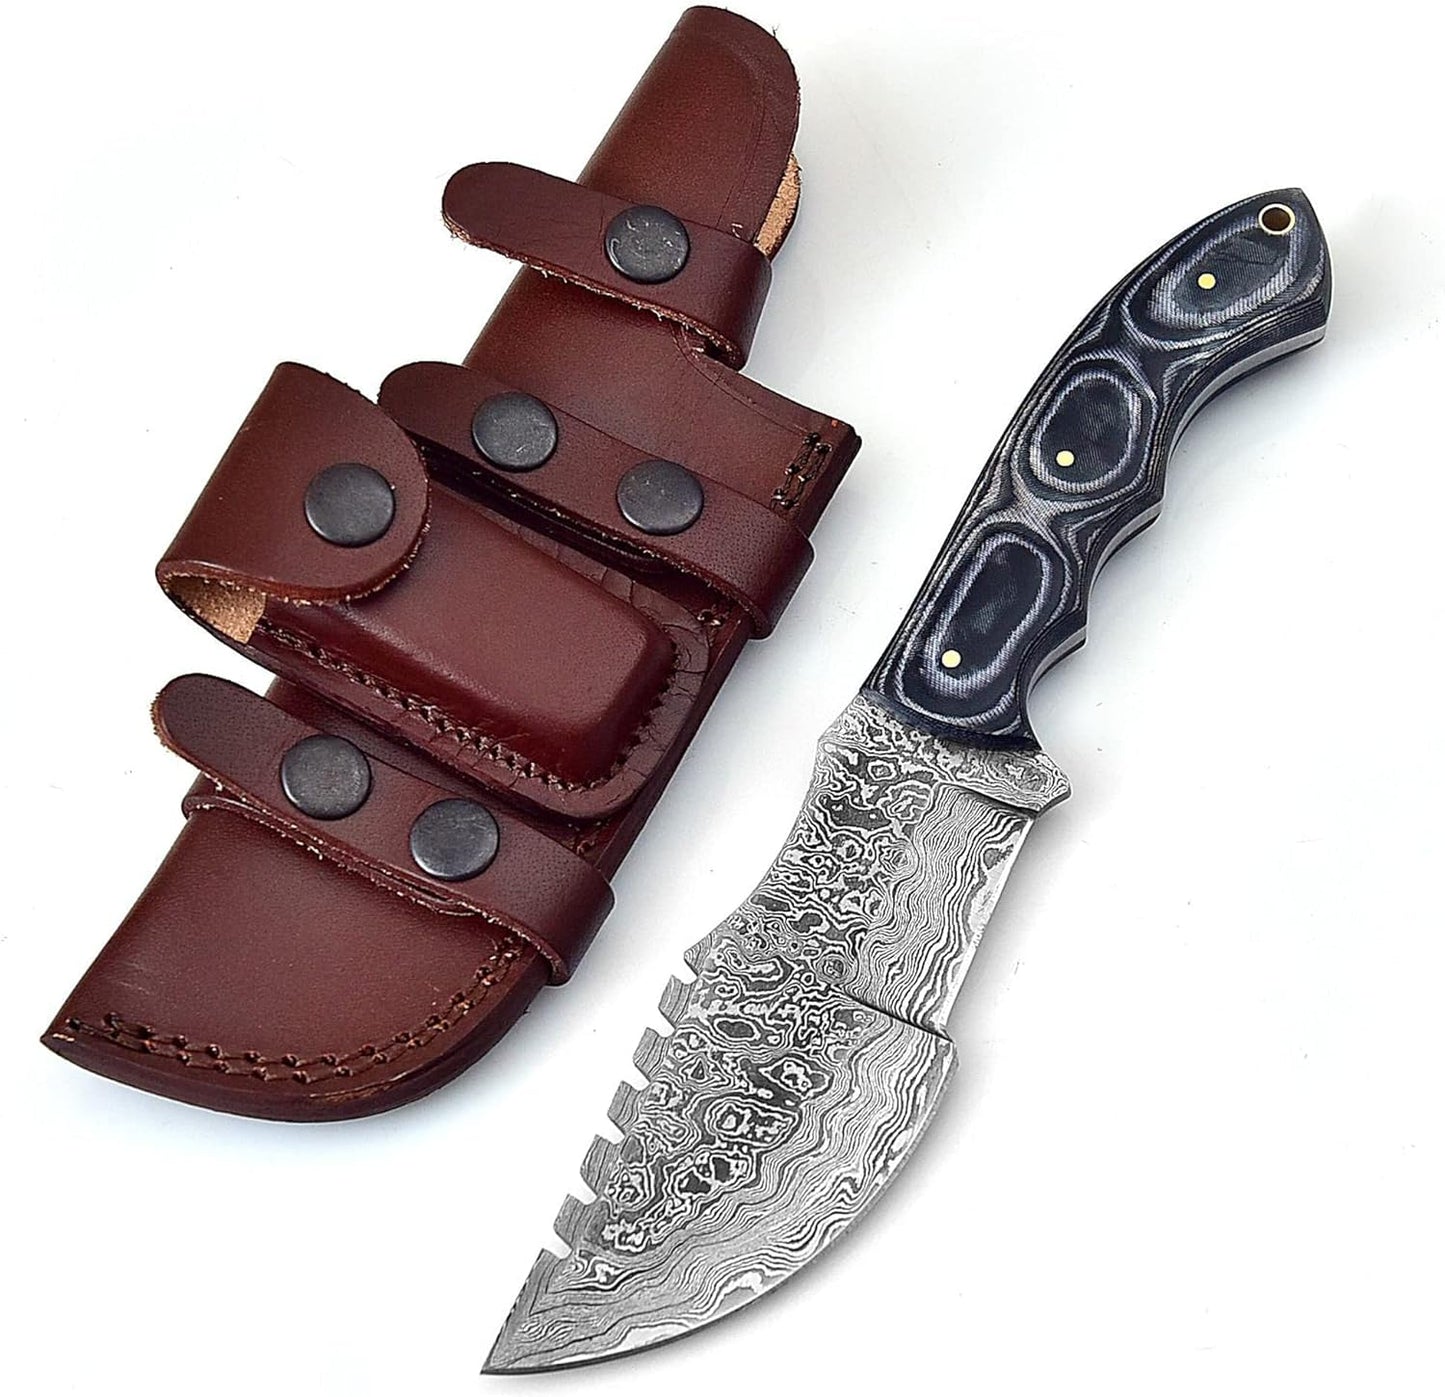 KD Hunting Knife 10" Handmade Damascus Steel for Camping Outdoor